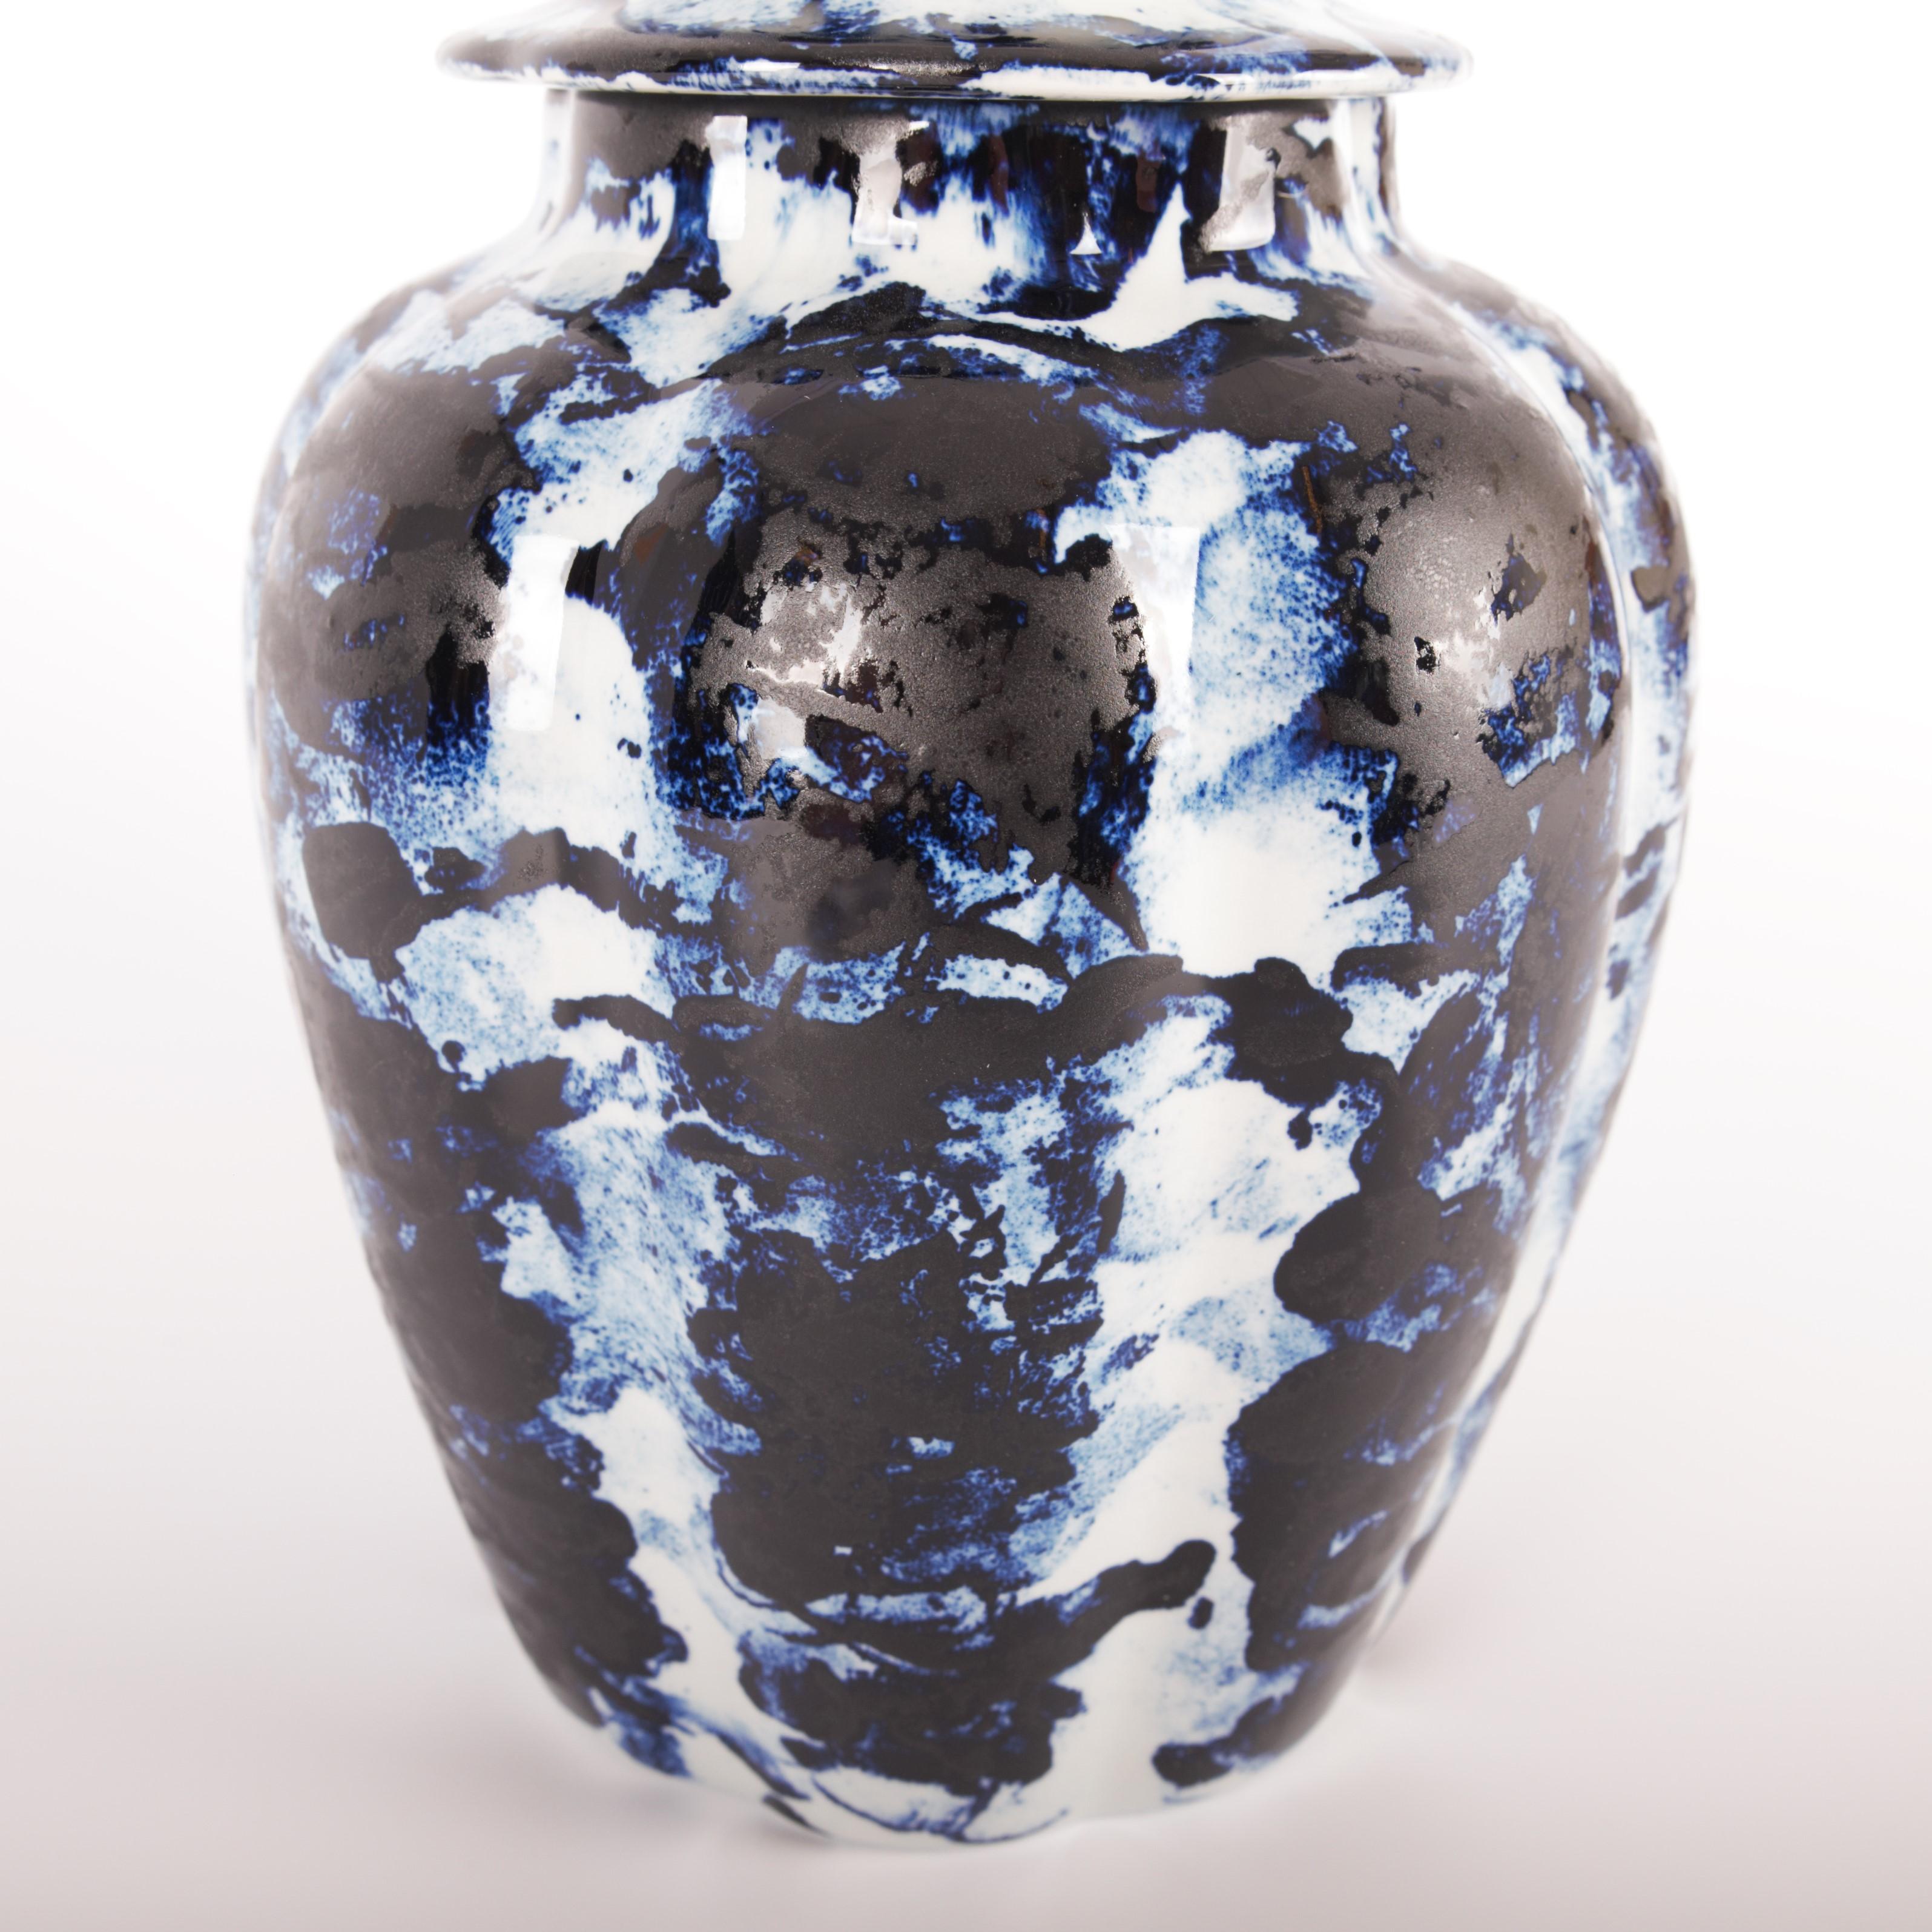 Ceramic Delft Blue Vase with Lid #2, by Marcel Wanders, Hand Painted, 2006, Unique For Sale